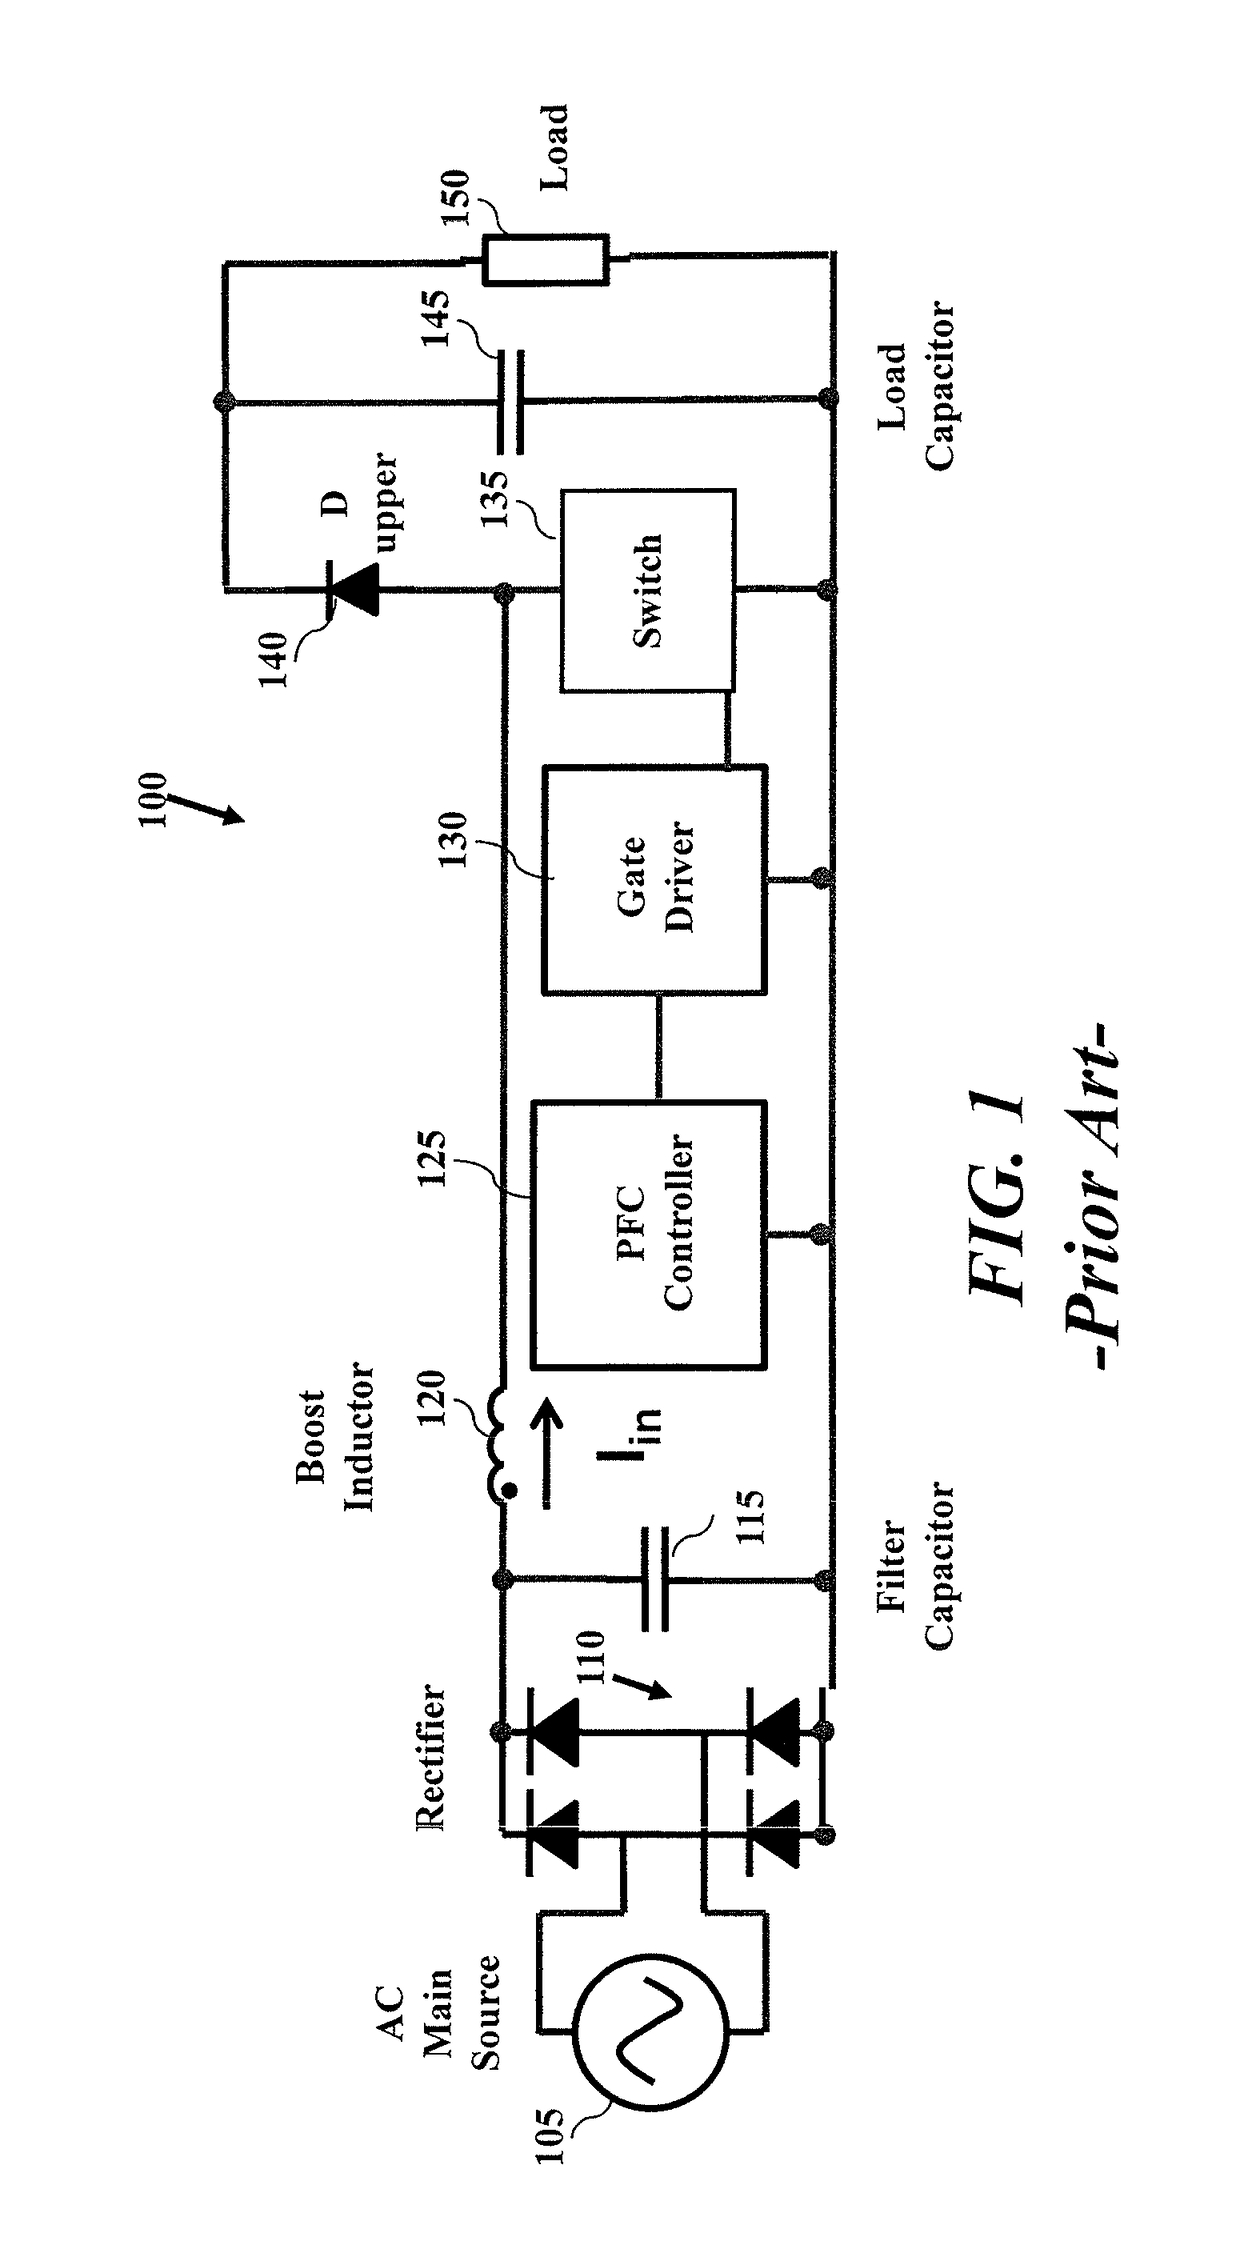 Method for operating a non-isolated switching converter having synchronous rectification capability suitable for power factor correction applications